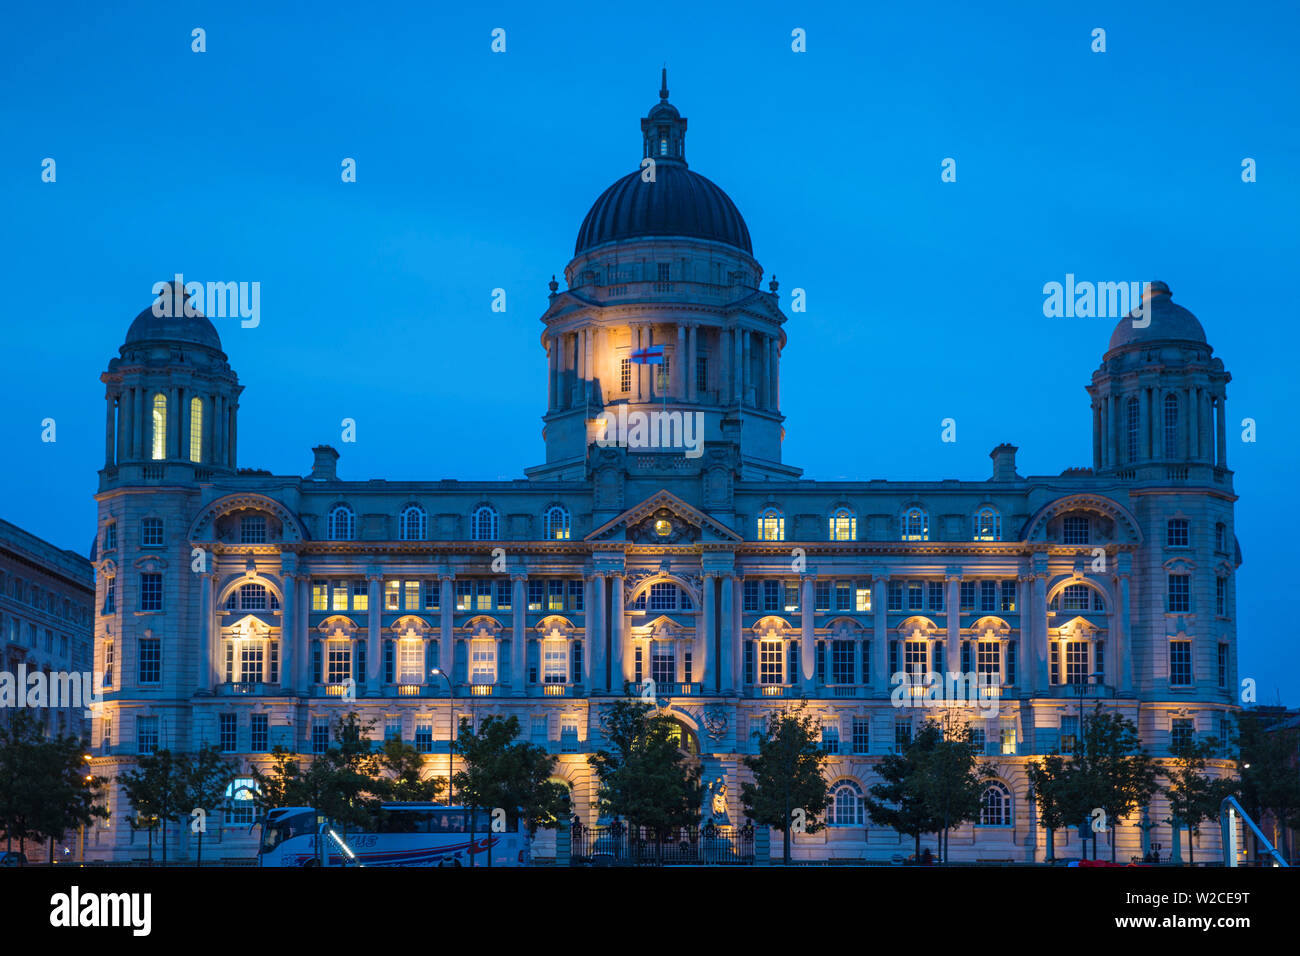 United Kingdom, England, Merseyside, Liverpool, The Port of Liverpool Building - one of The Three Graces buildings Stock Photo